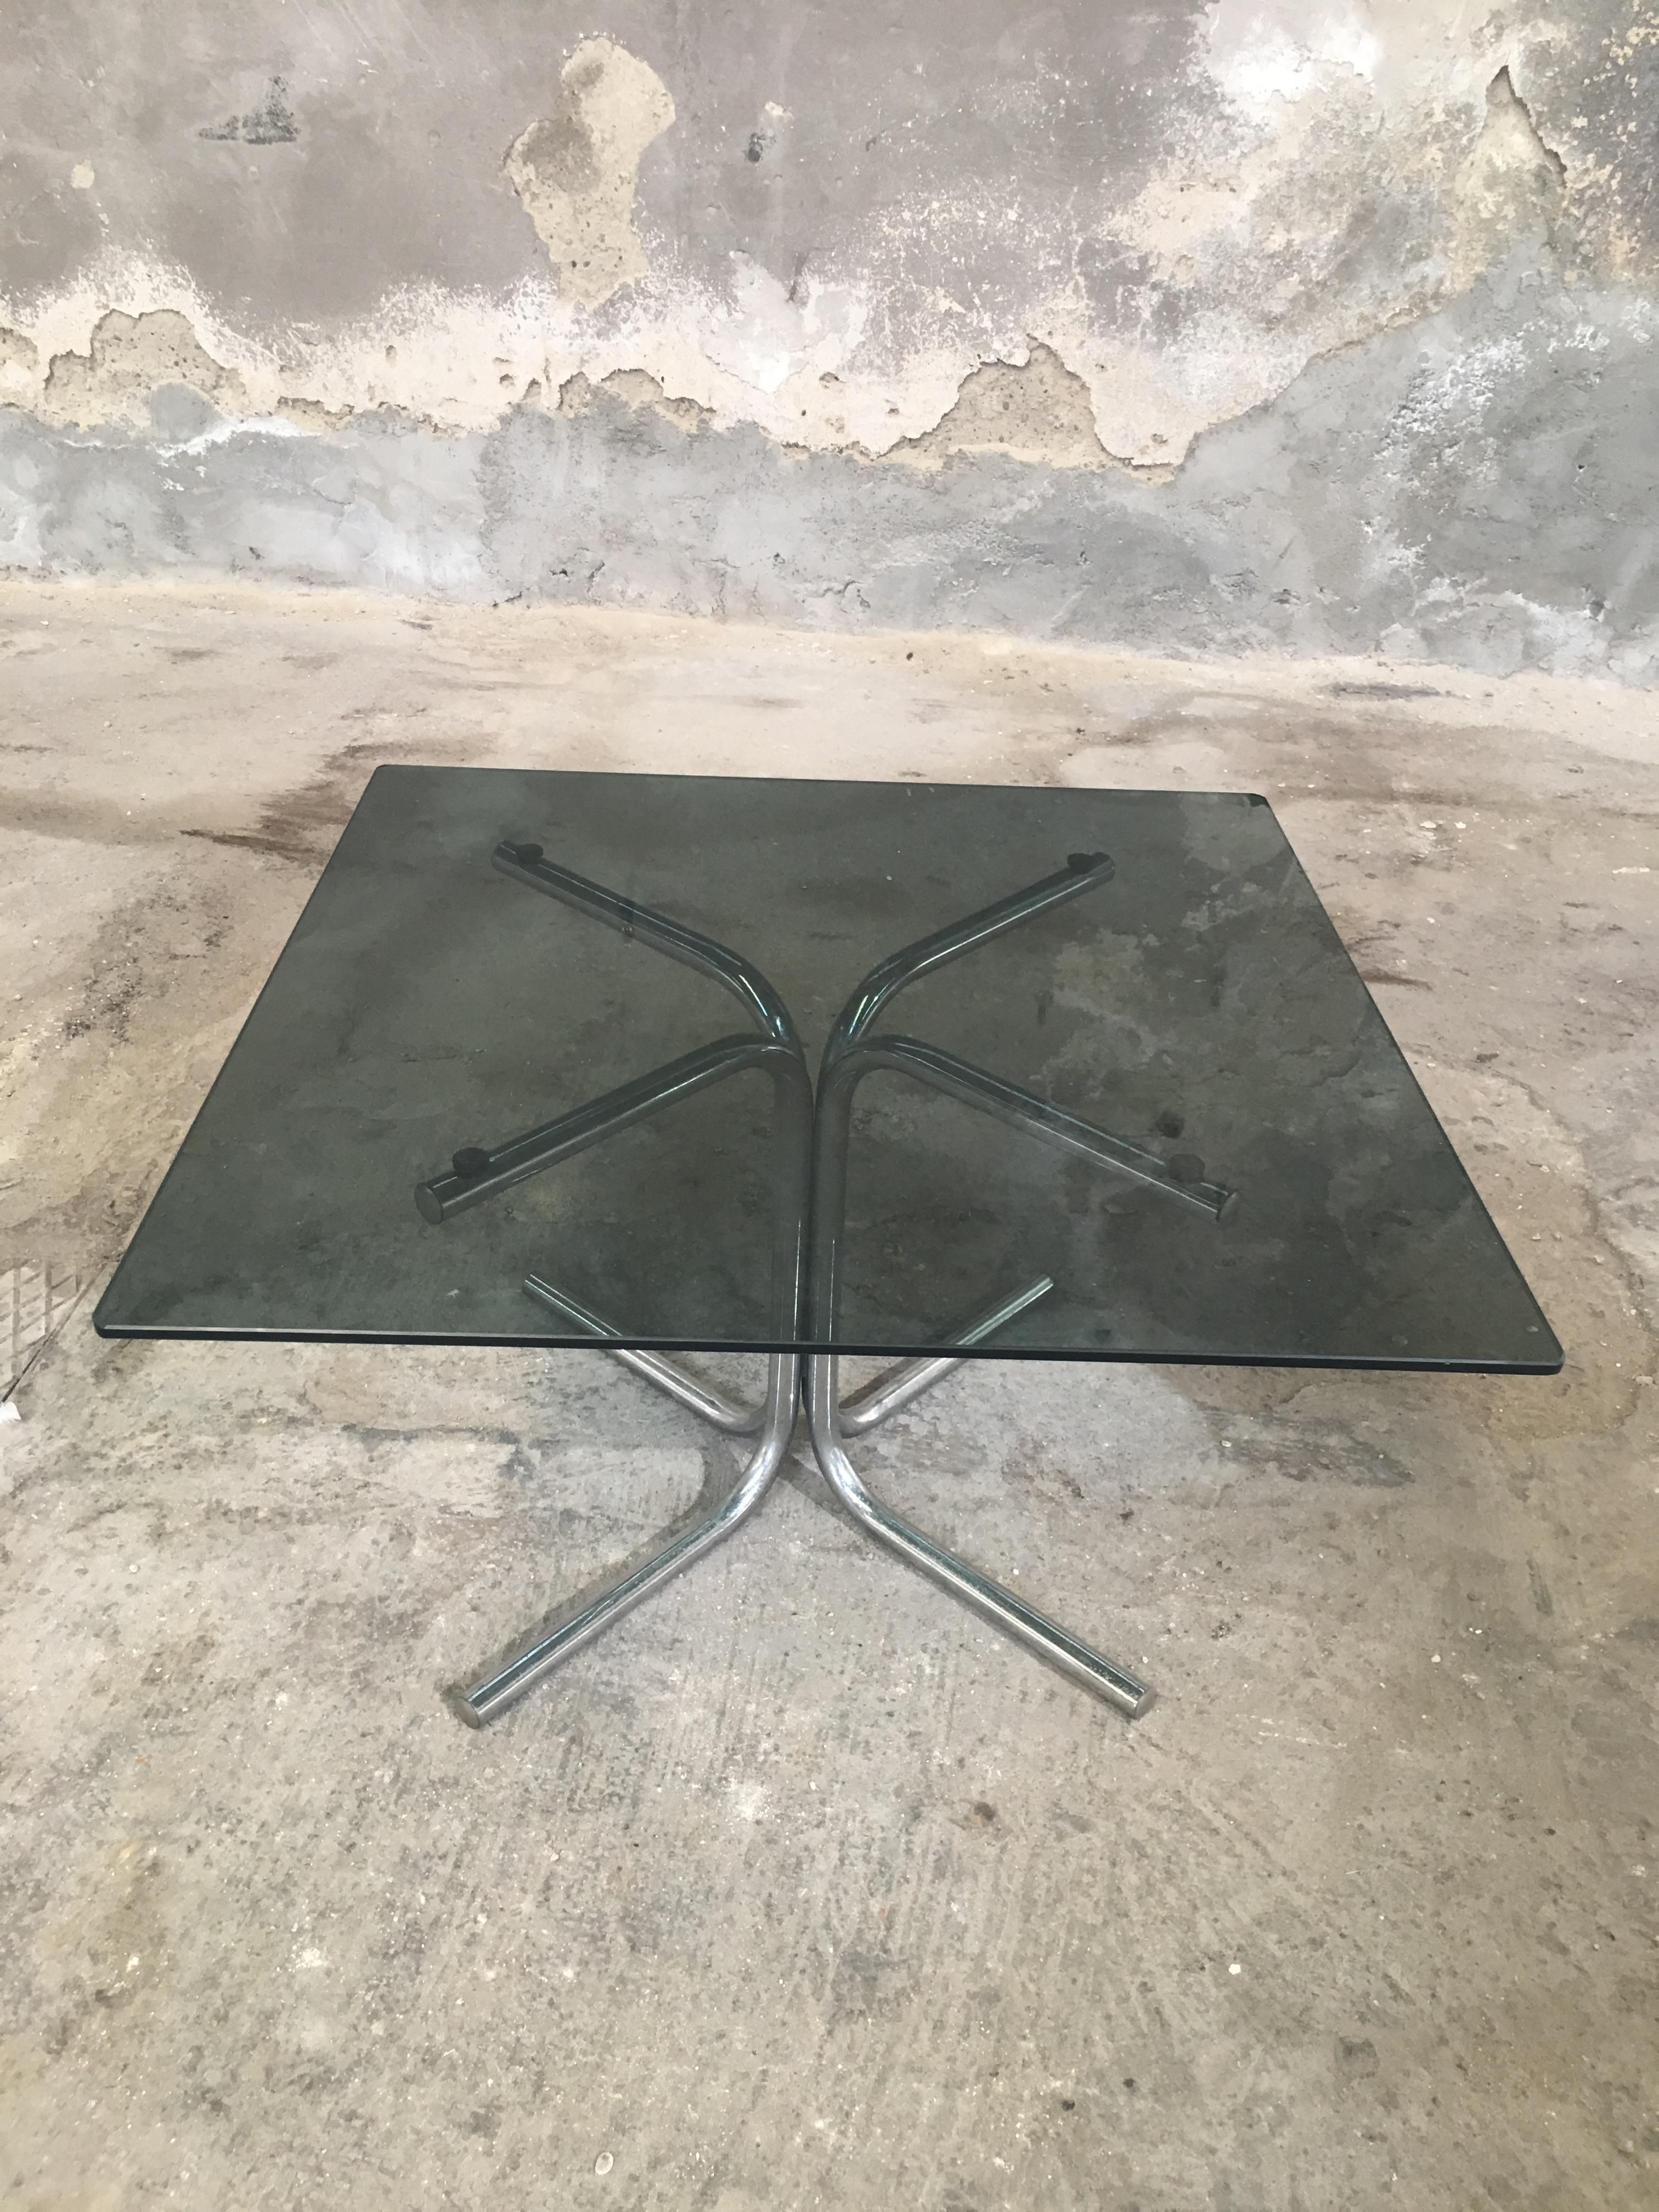 Late 20th Century Mid-Century Modern Italian Chrome Side or Coffee Table with Smoked Glass Top